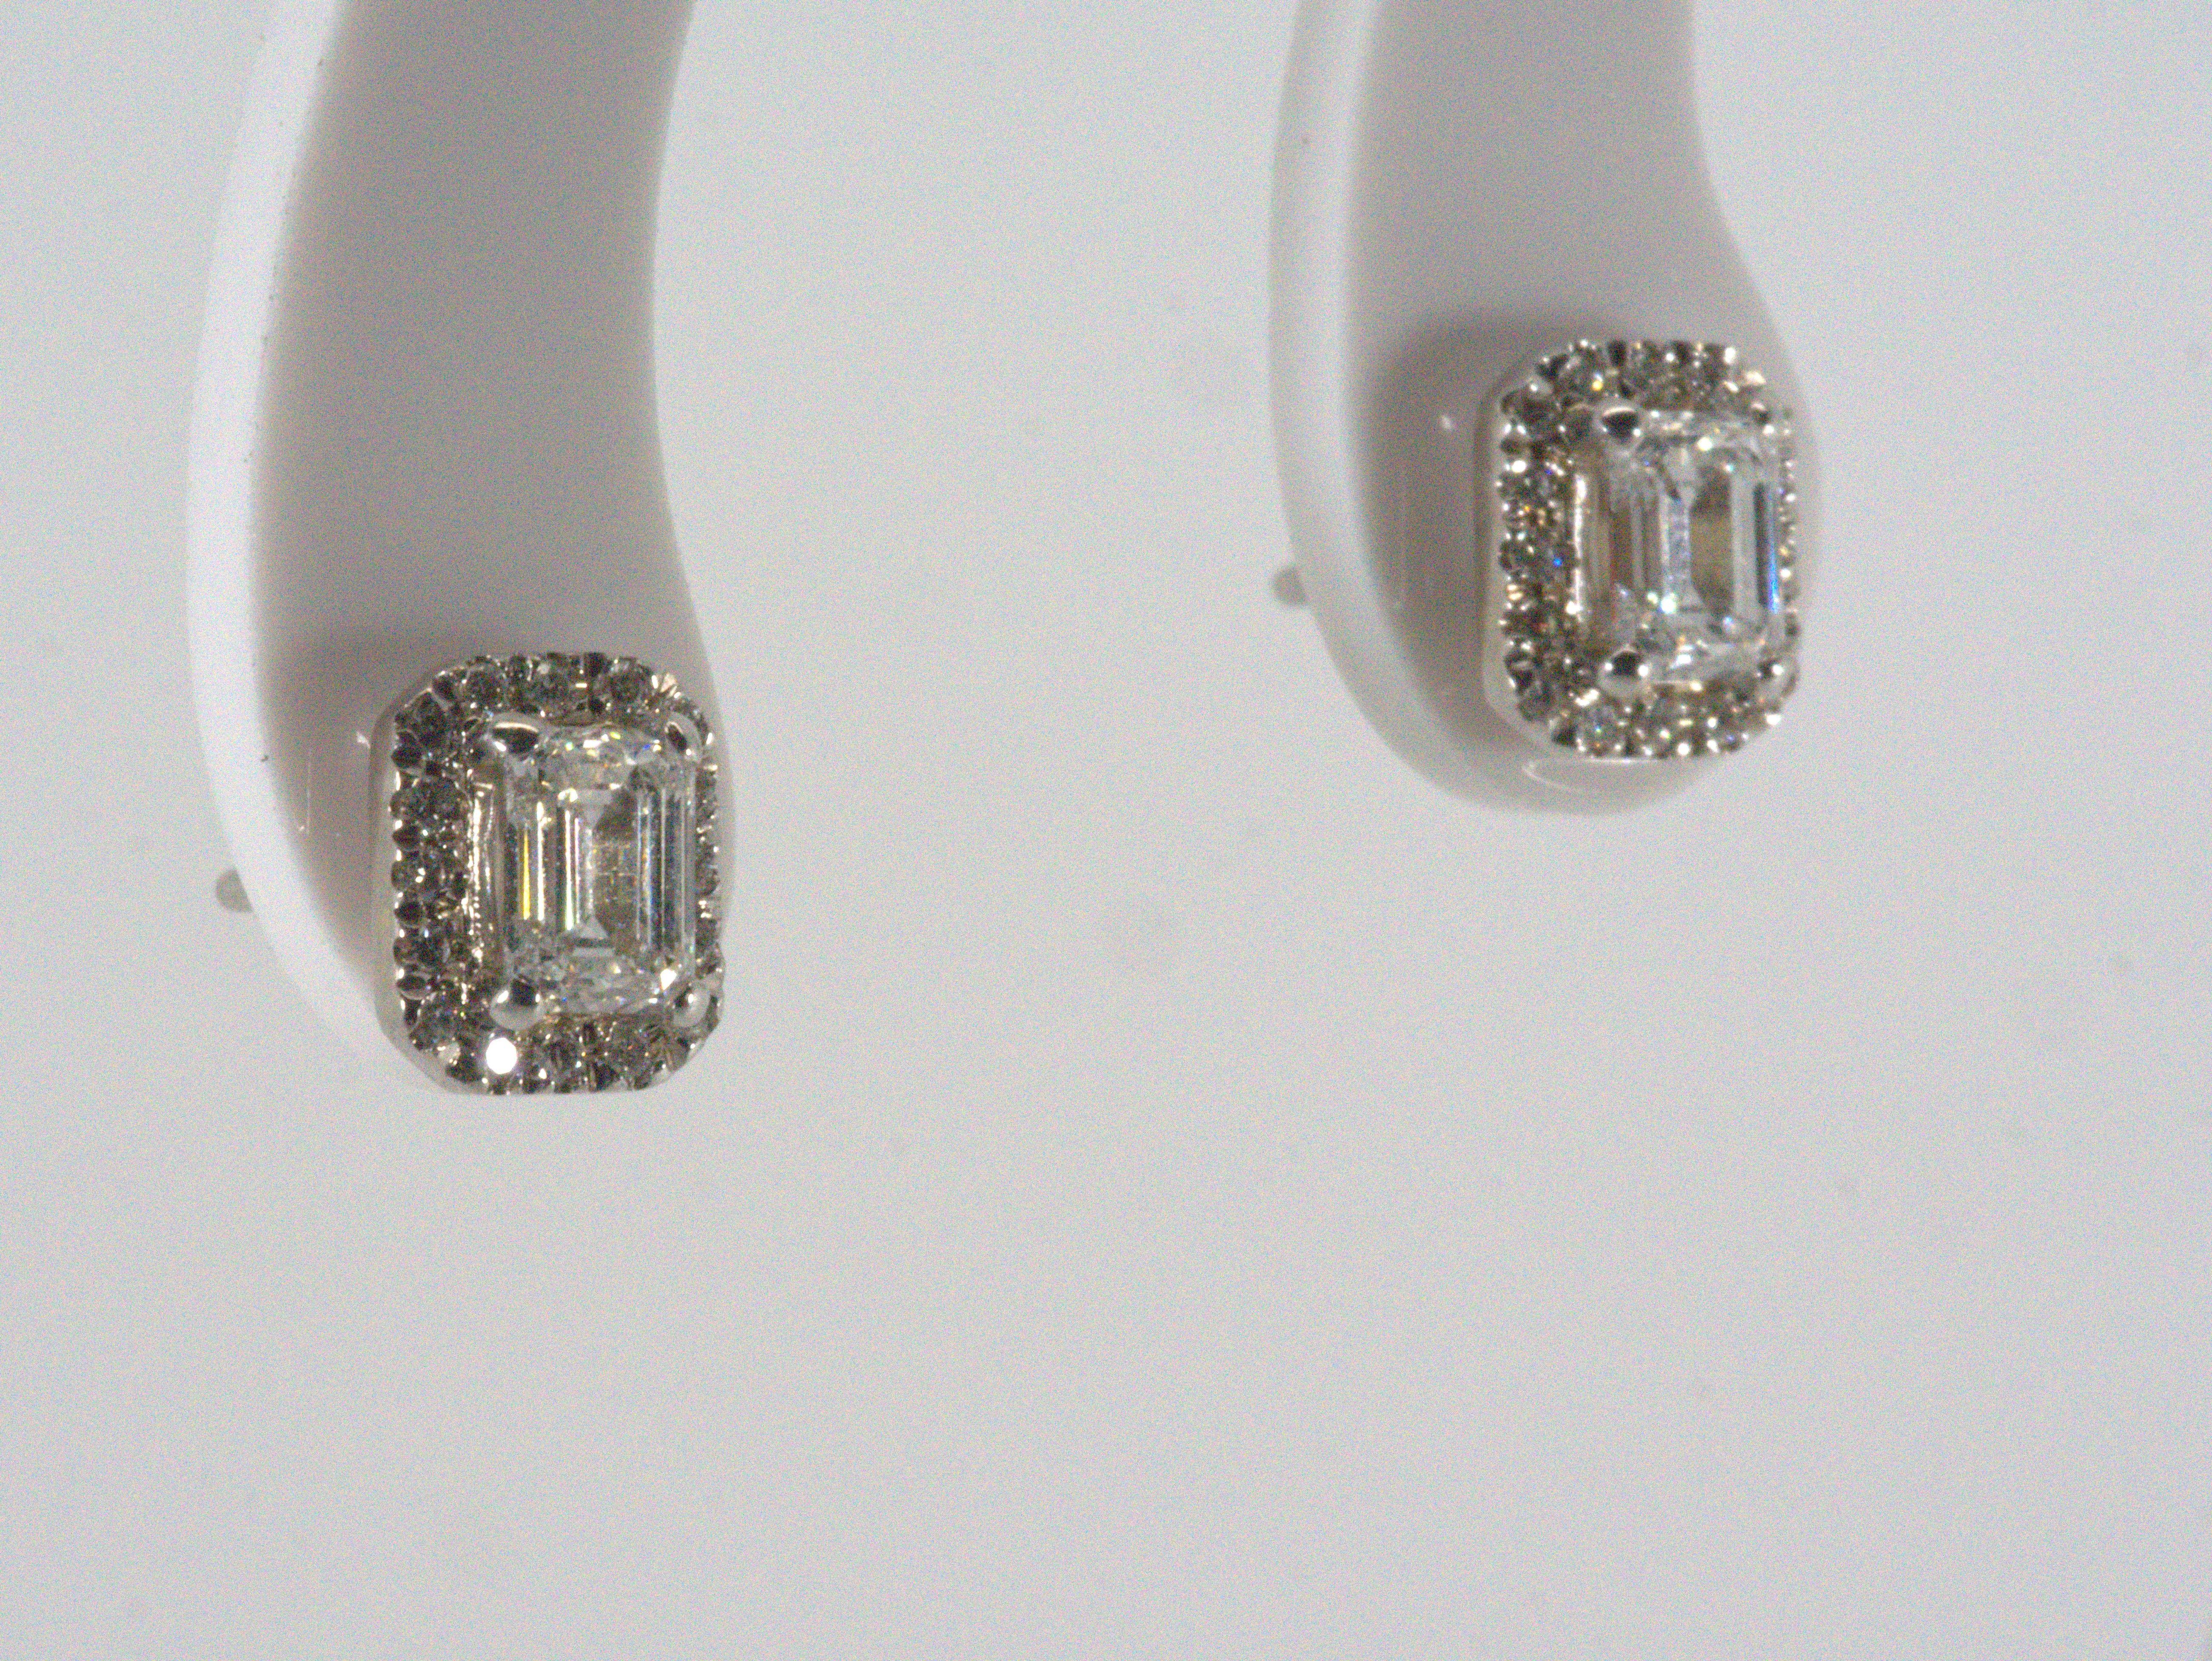 Beautiful 18k White Gold Earrings with 0.93 Ct Natural Diamonds, GIA Cert 4